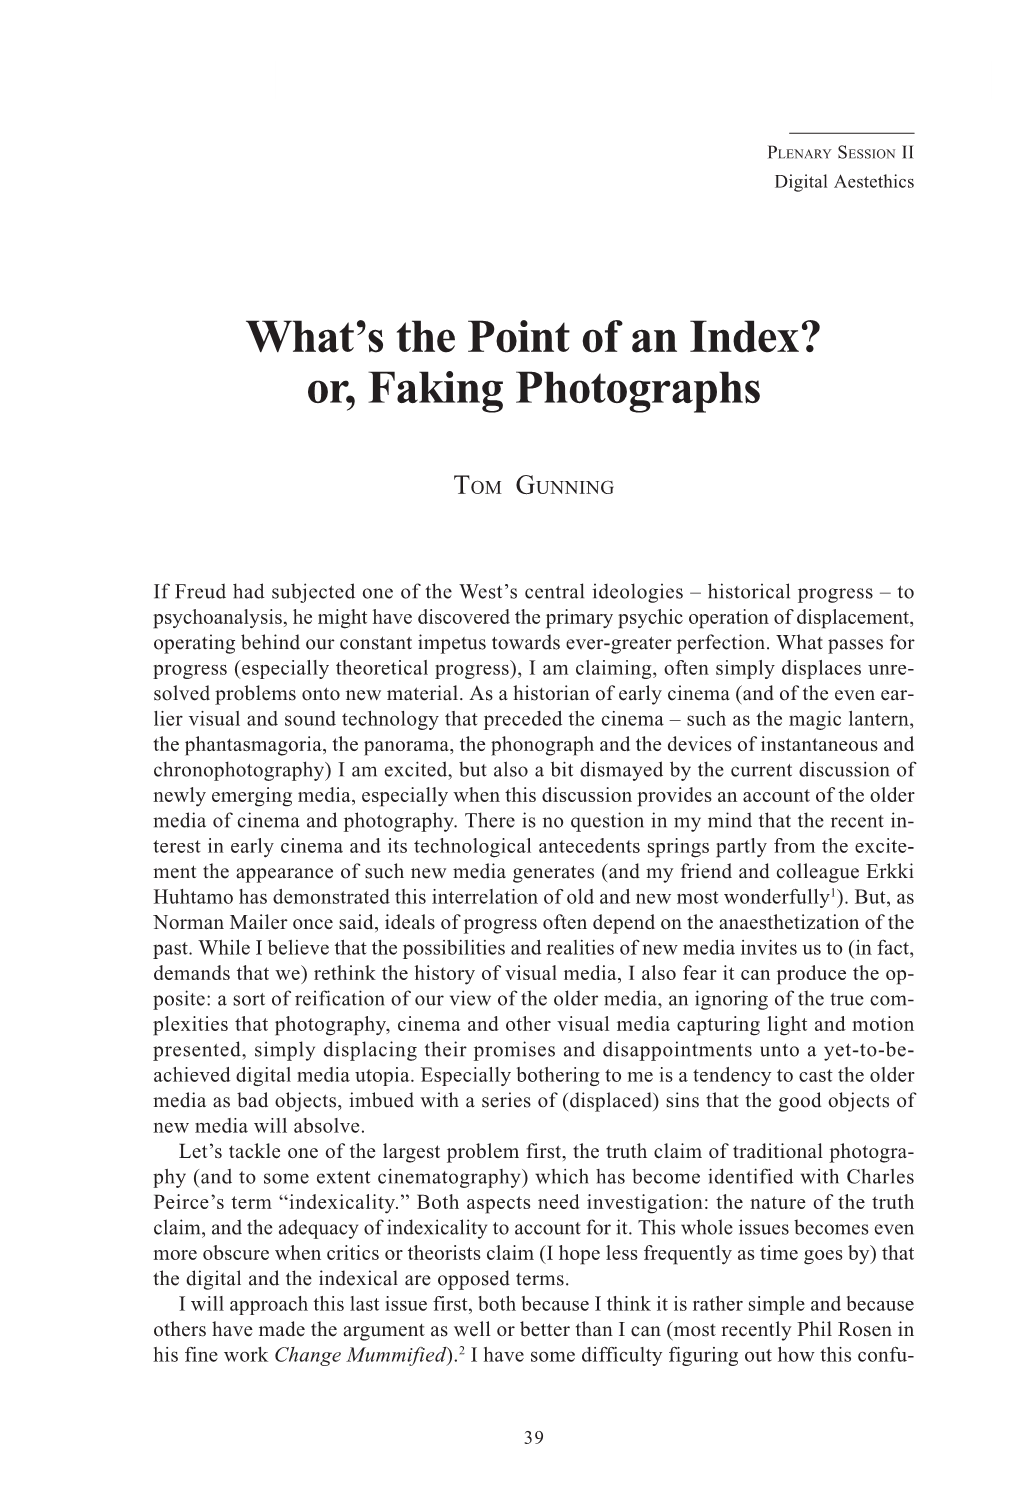 What's the Point of an Index? Or, Faking Photographs